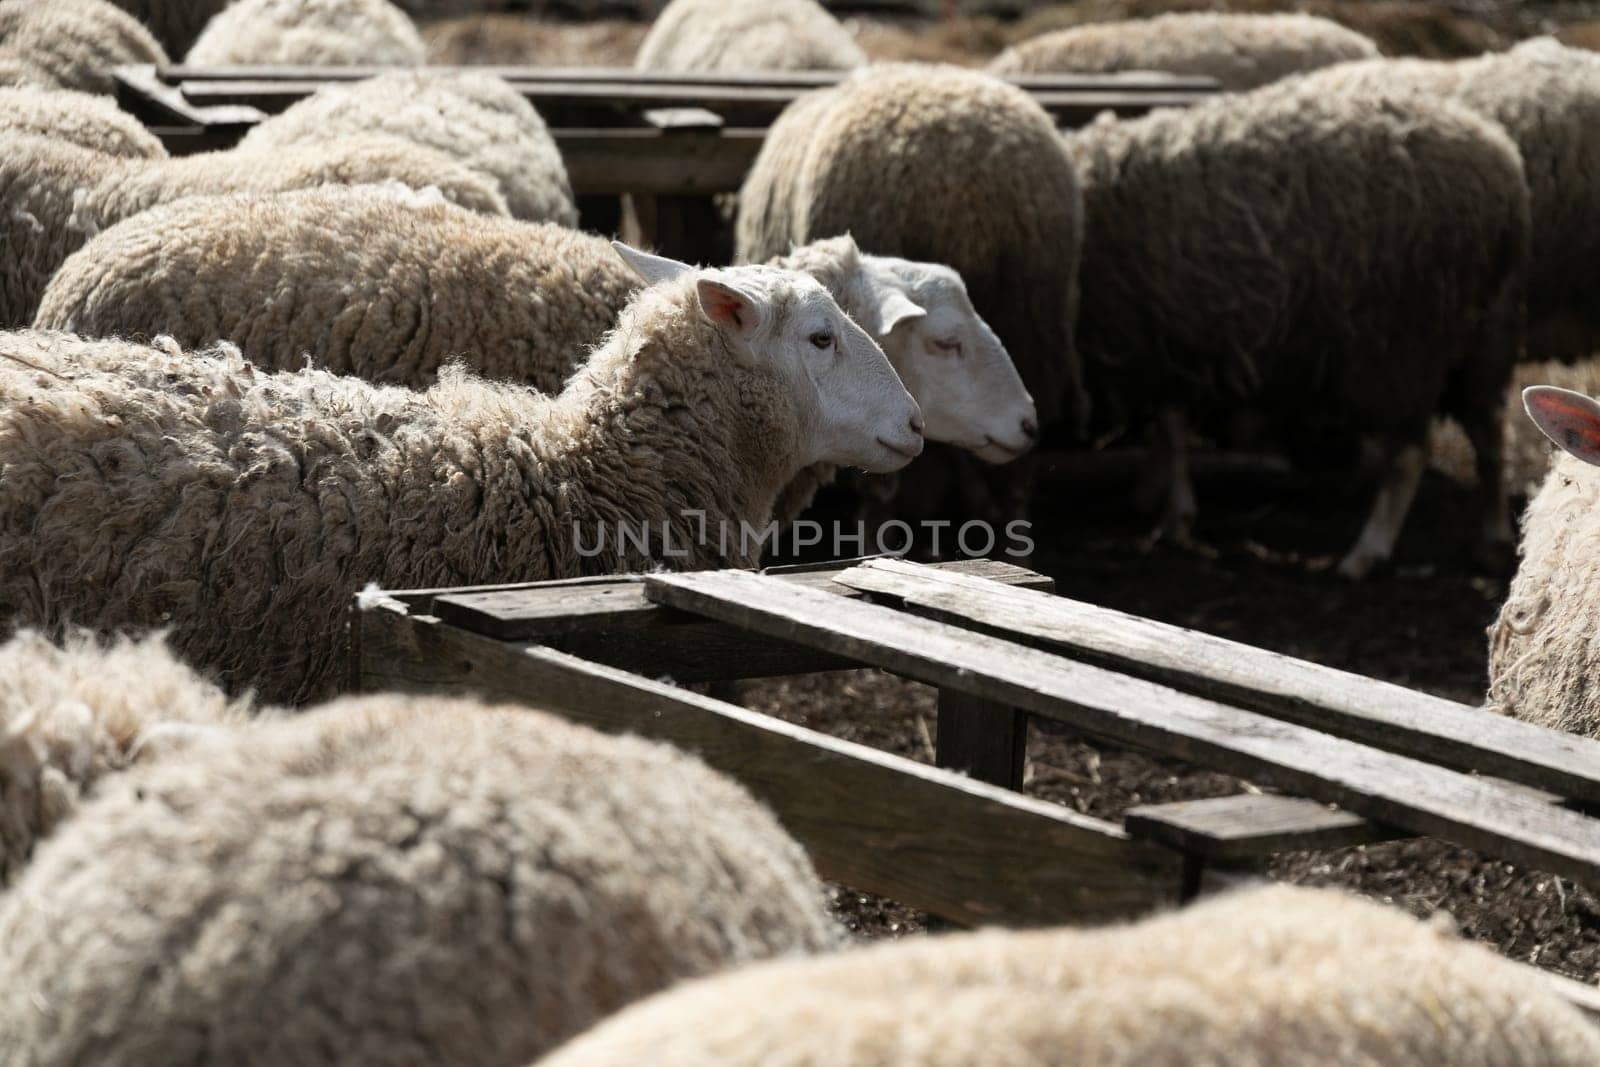 A group of sheep gathered together, standing closely alongside one another in a field. The sheep are facing the same direction, possibly grazing or resting. The herd exhibits unity and cohesion as they huddle together.